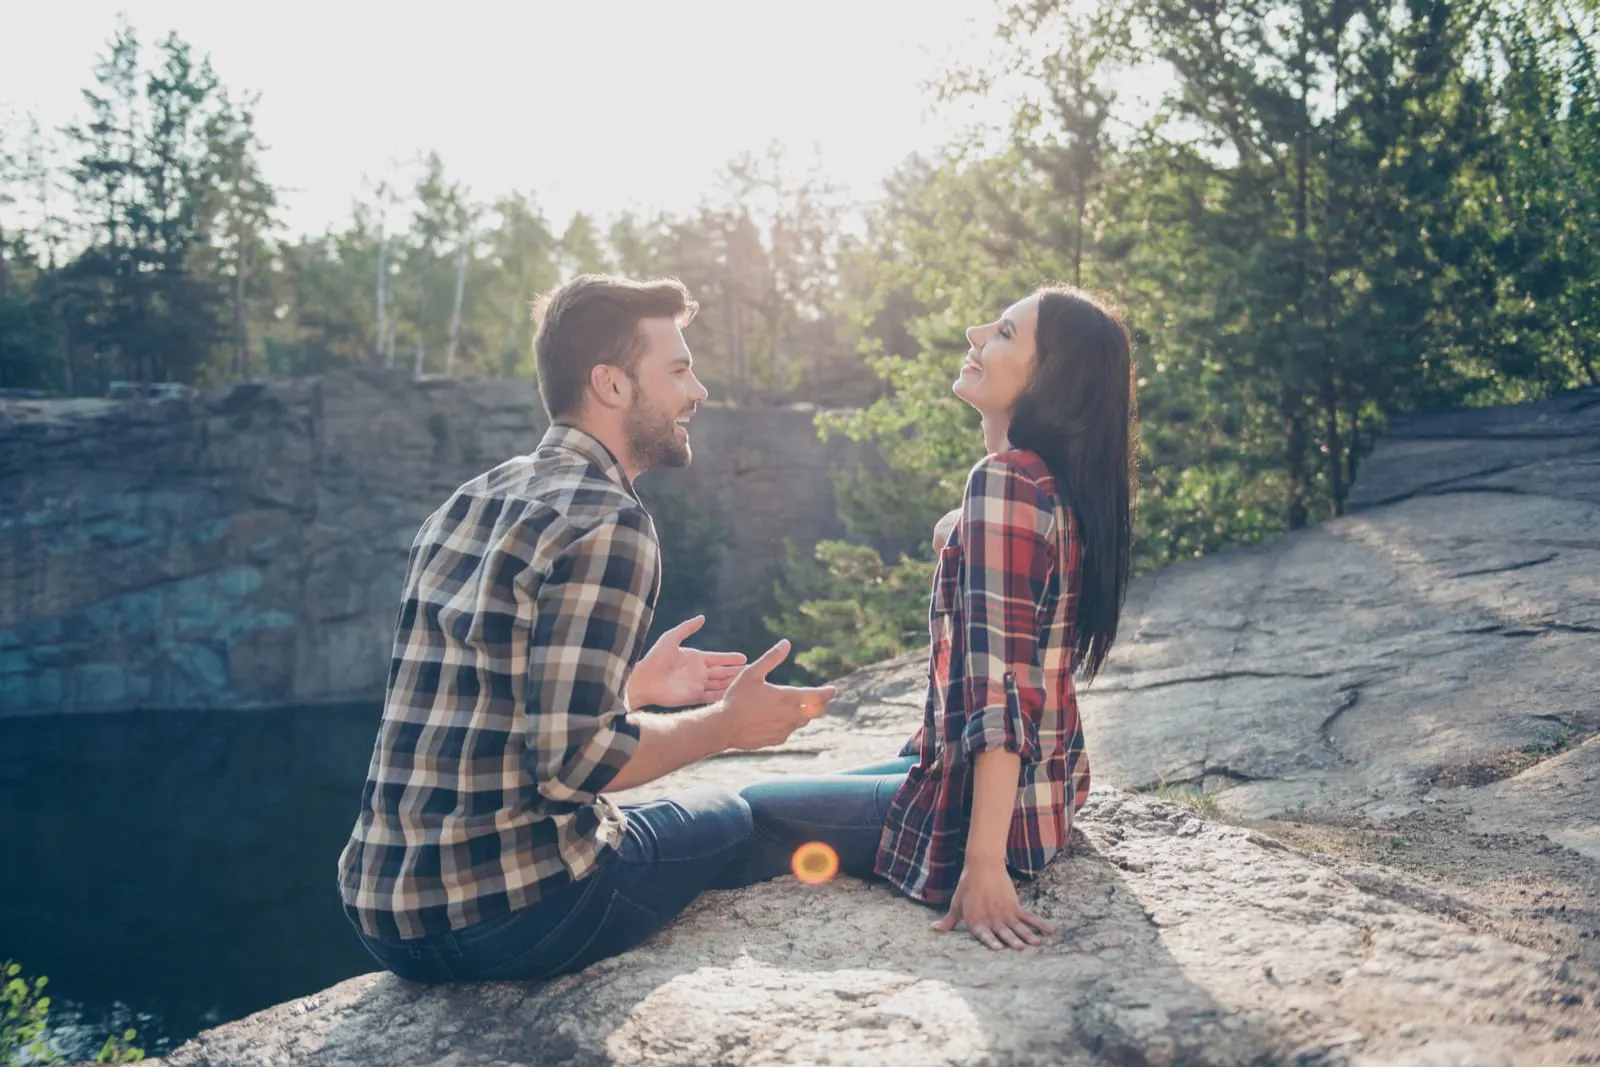 a smiling couple having fun on a rock in nature